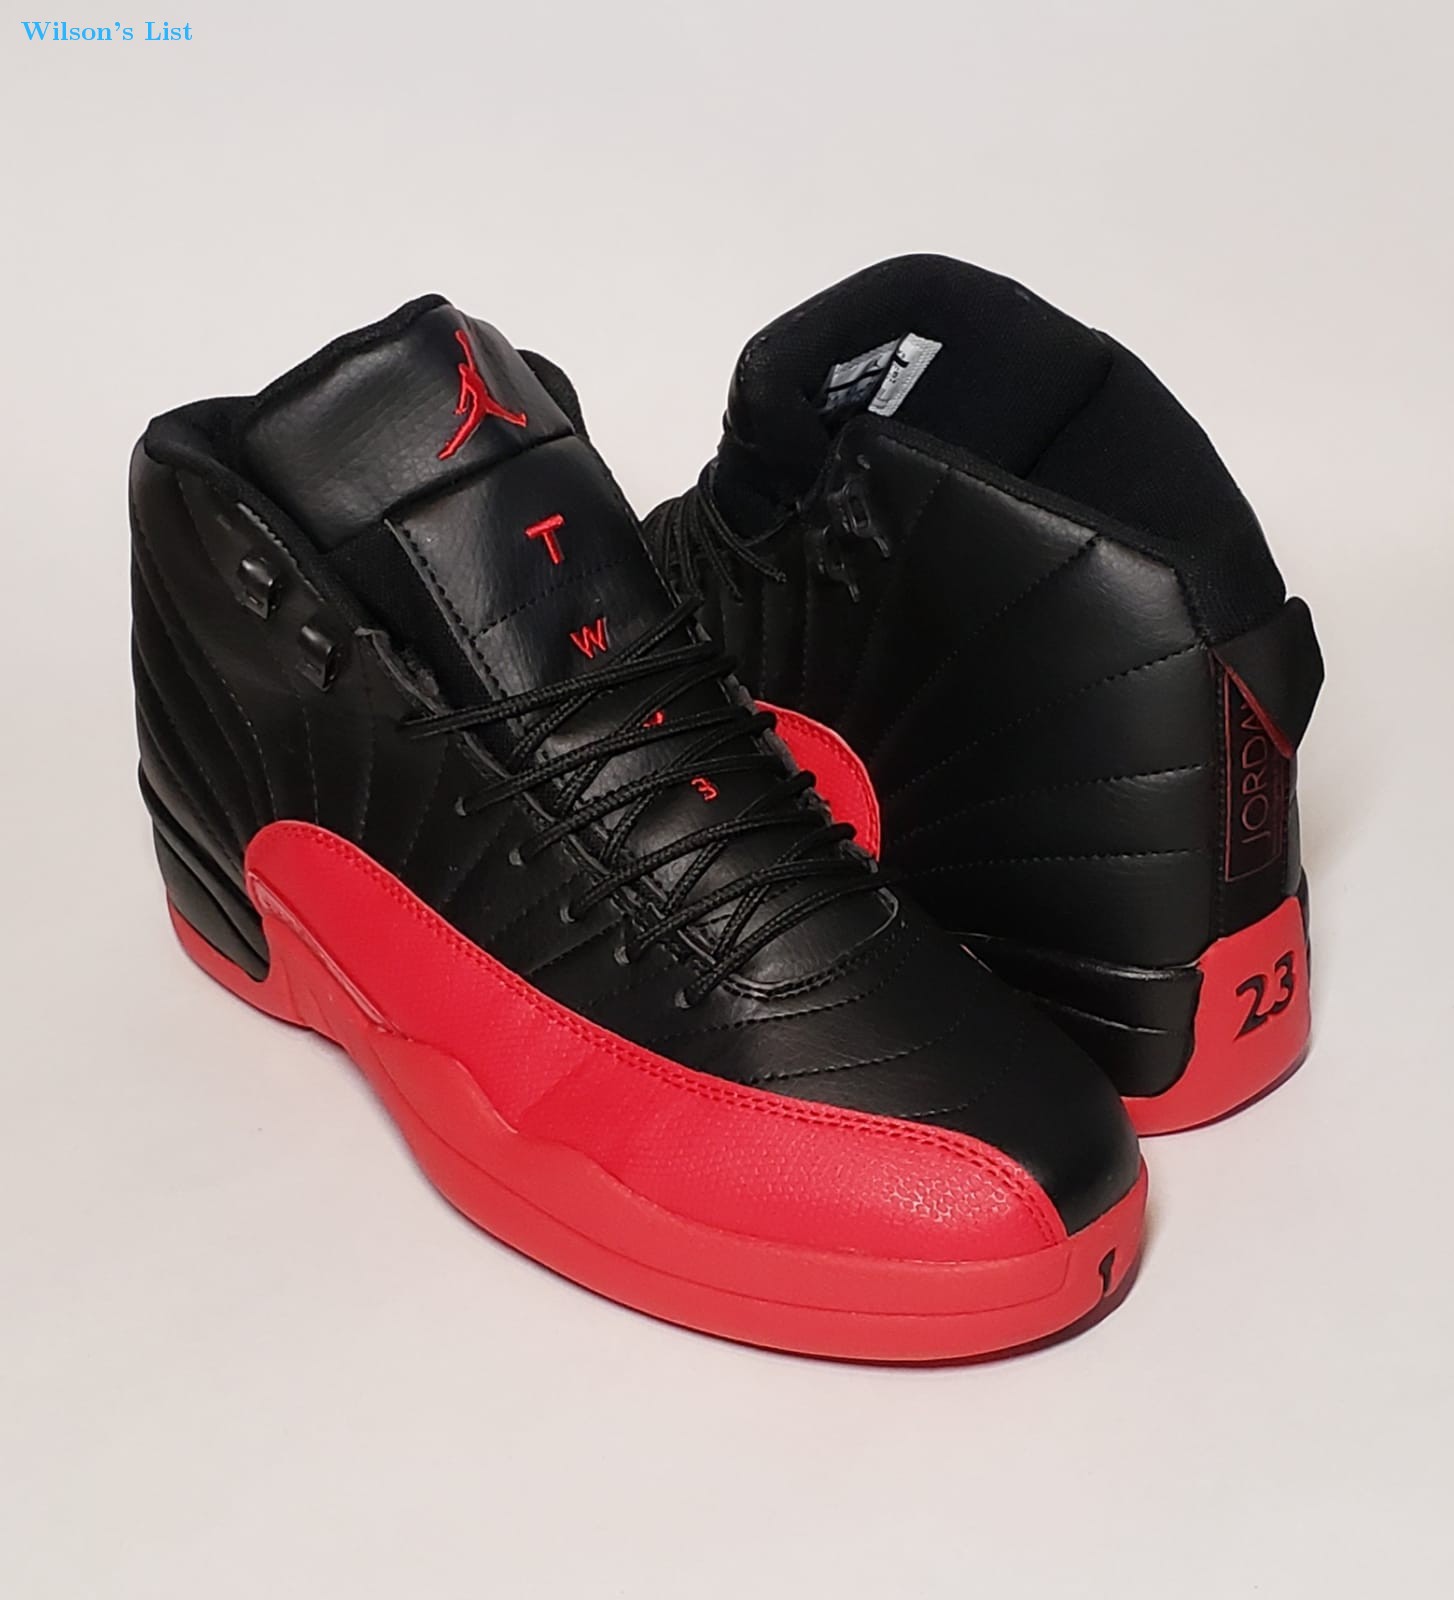 jordan two3 black and red